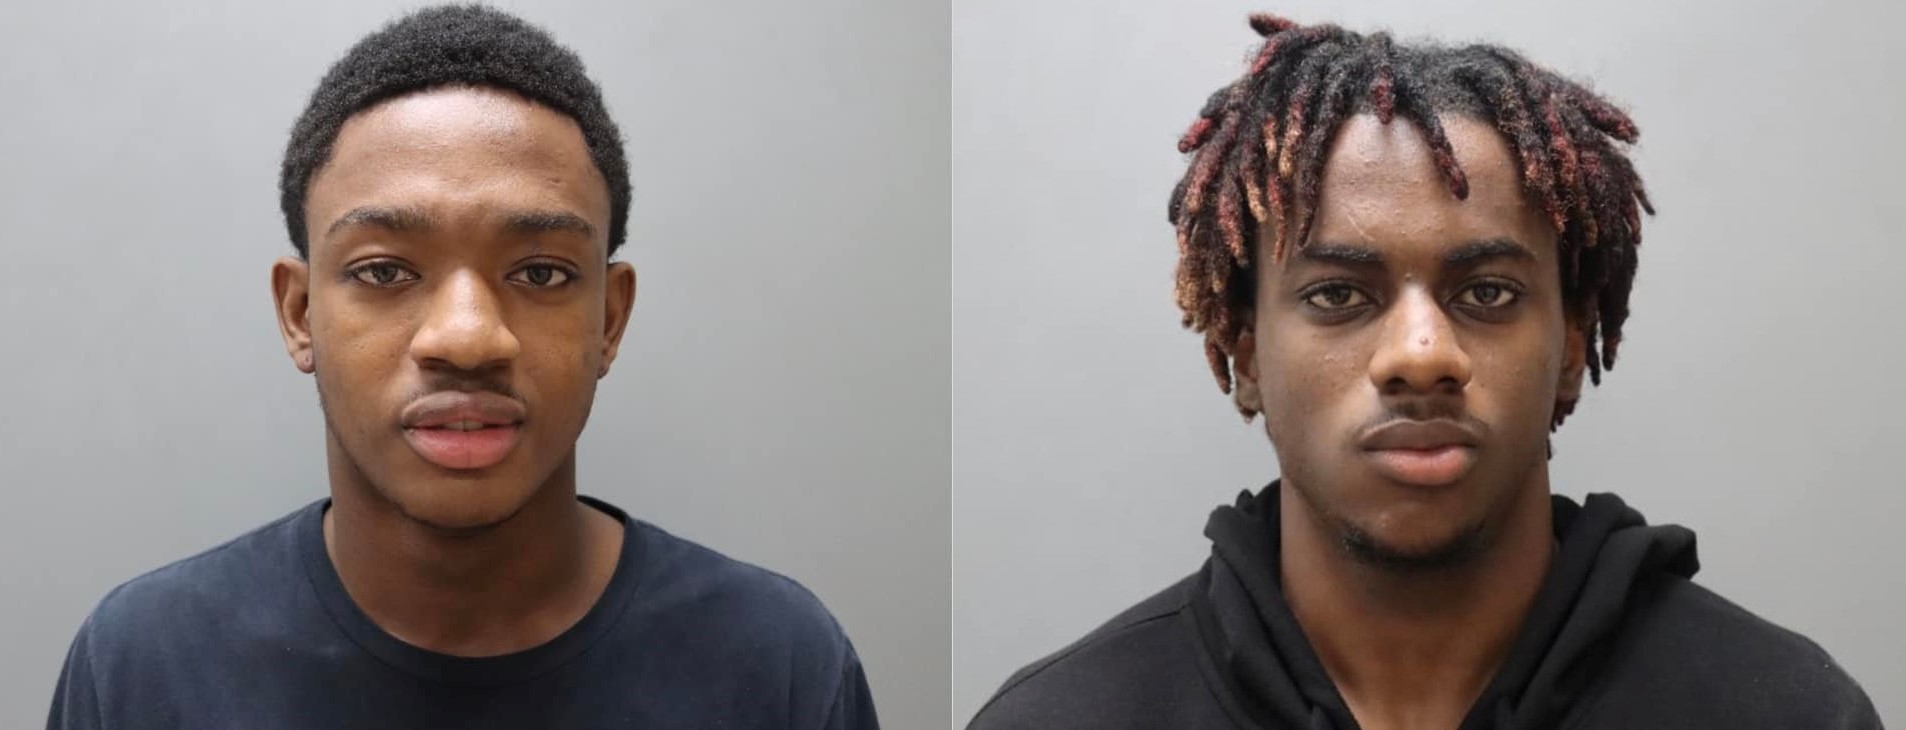 Routine Traffic Stop For Tinted Windows Leads To Arrest Of 2 Teens On Drug, Gun Charges